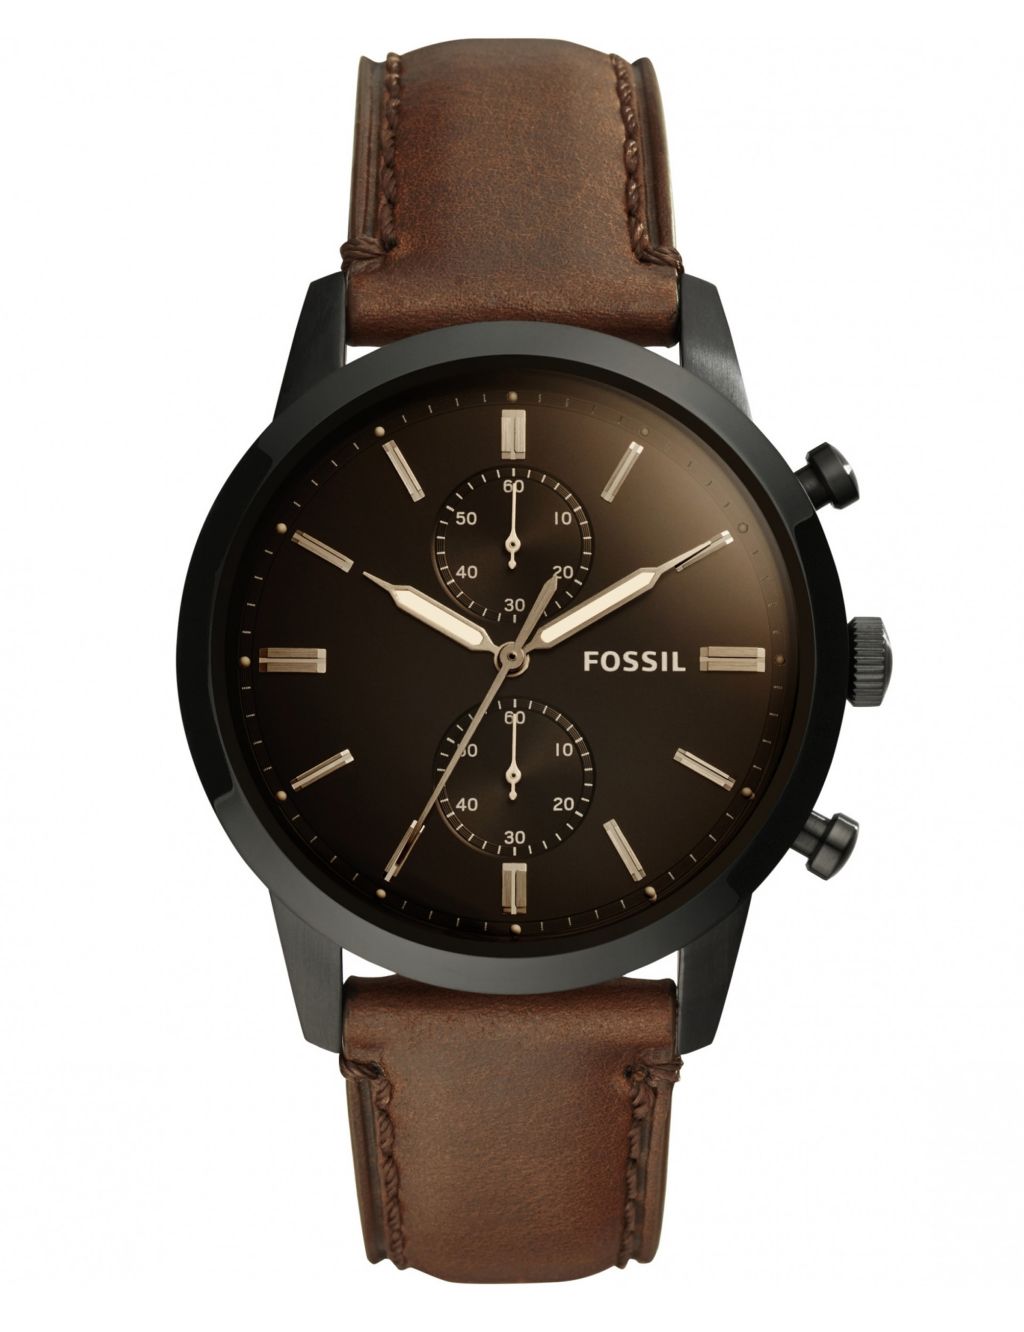 Fossil Townsman Brown Leather Automatic Watch image 1